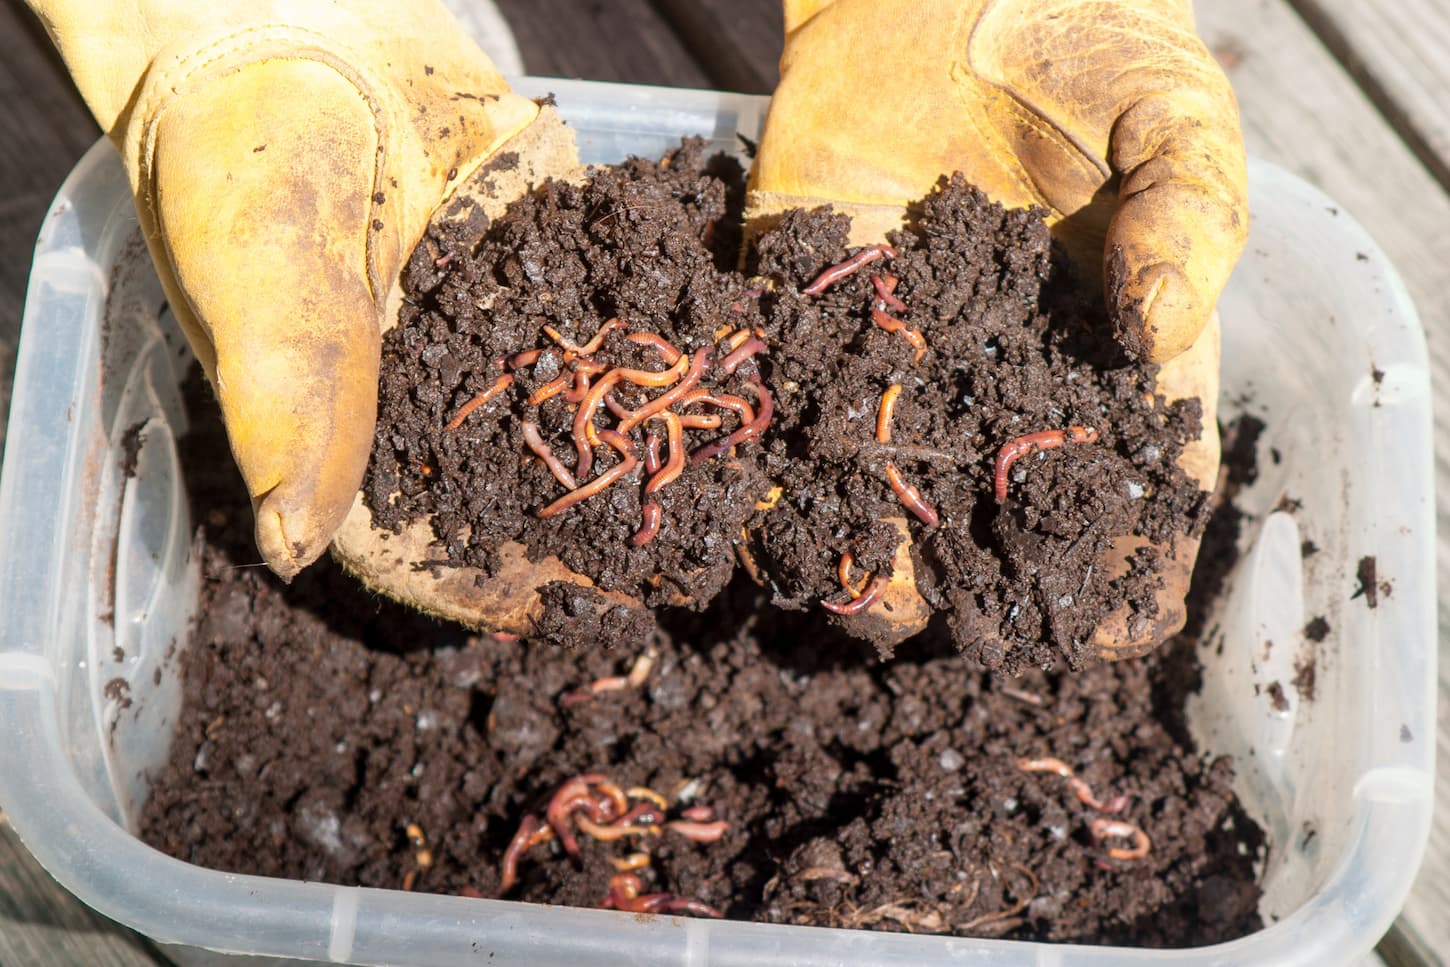 An image of red wigglers in a container full of soil.